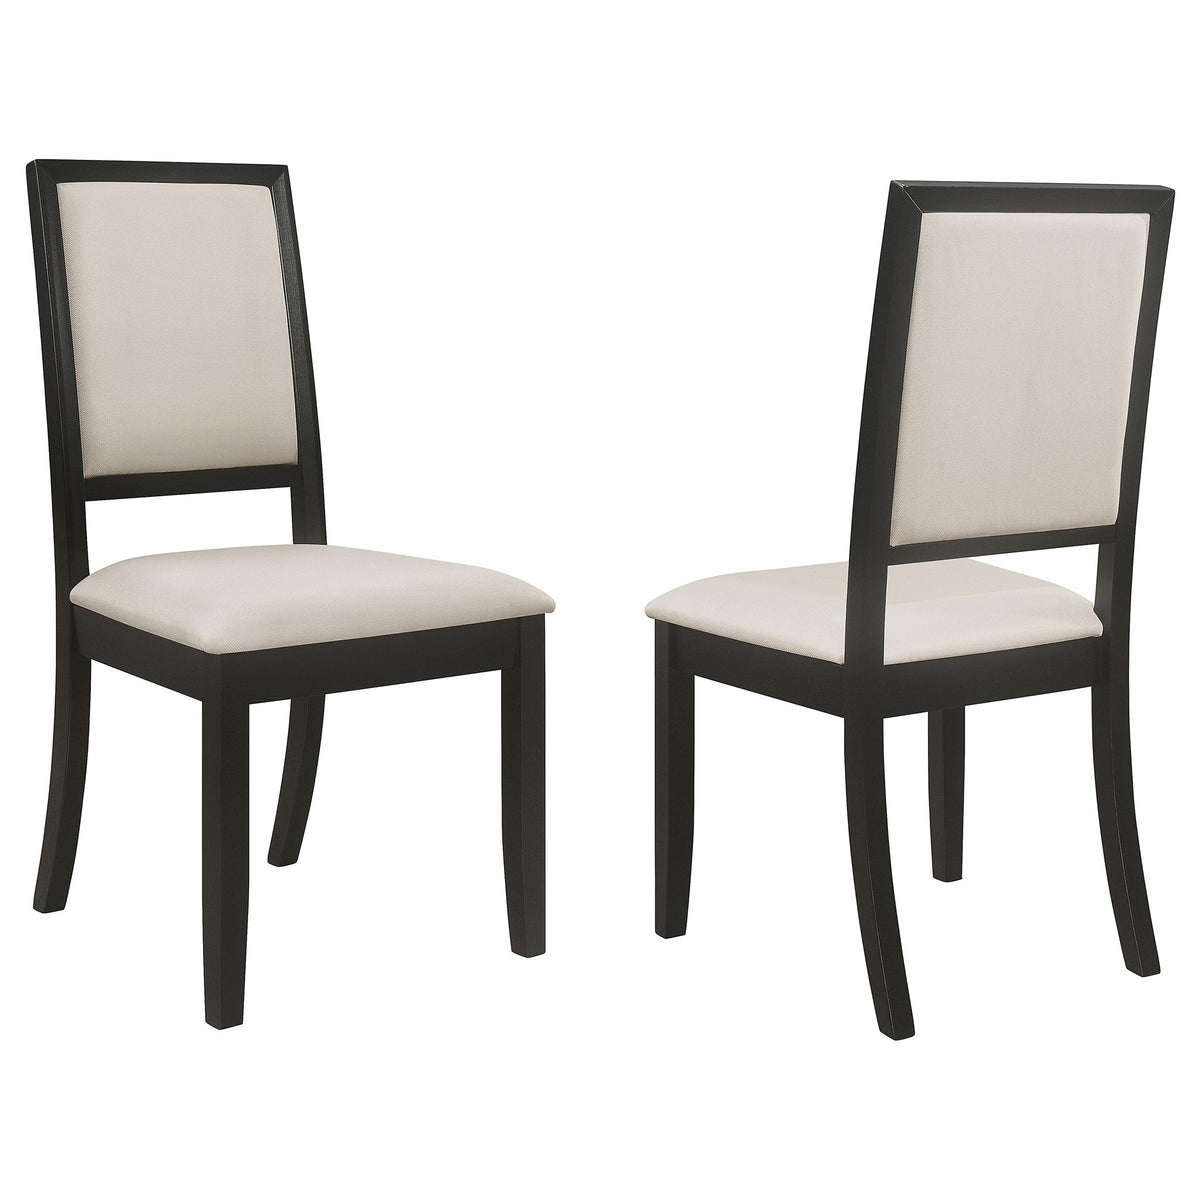 Louise Upholstered Dining Side Chairs Black and Cream (Set of 2) Louise Upholstered Dining Side Chairs Black and Cream (Set of 2) Half Price Furniture